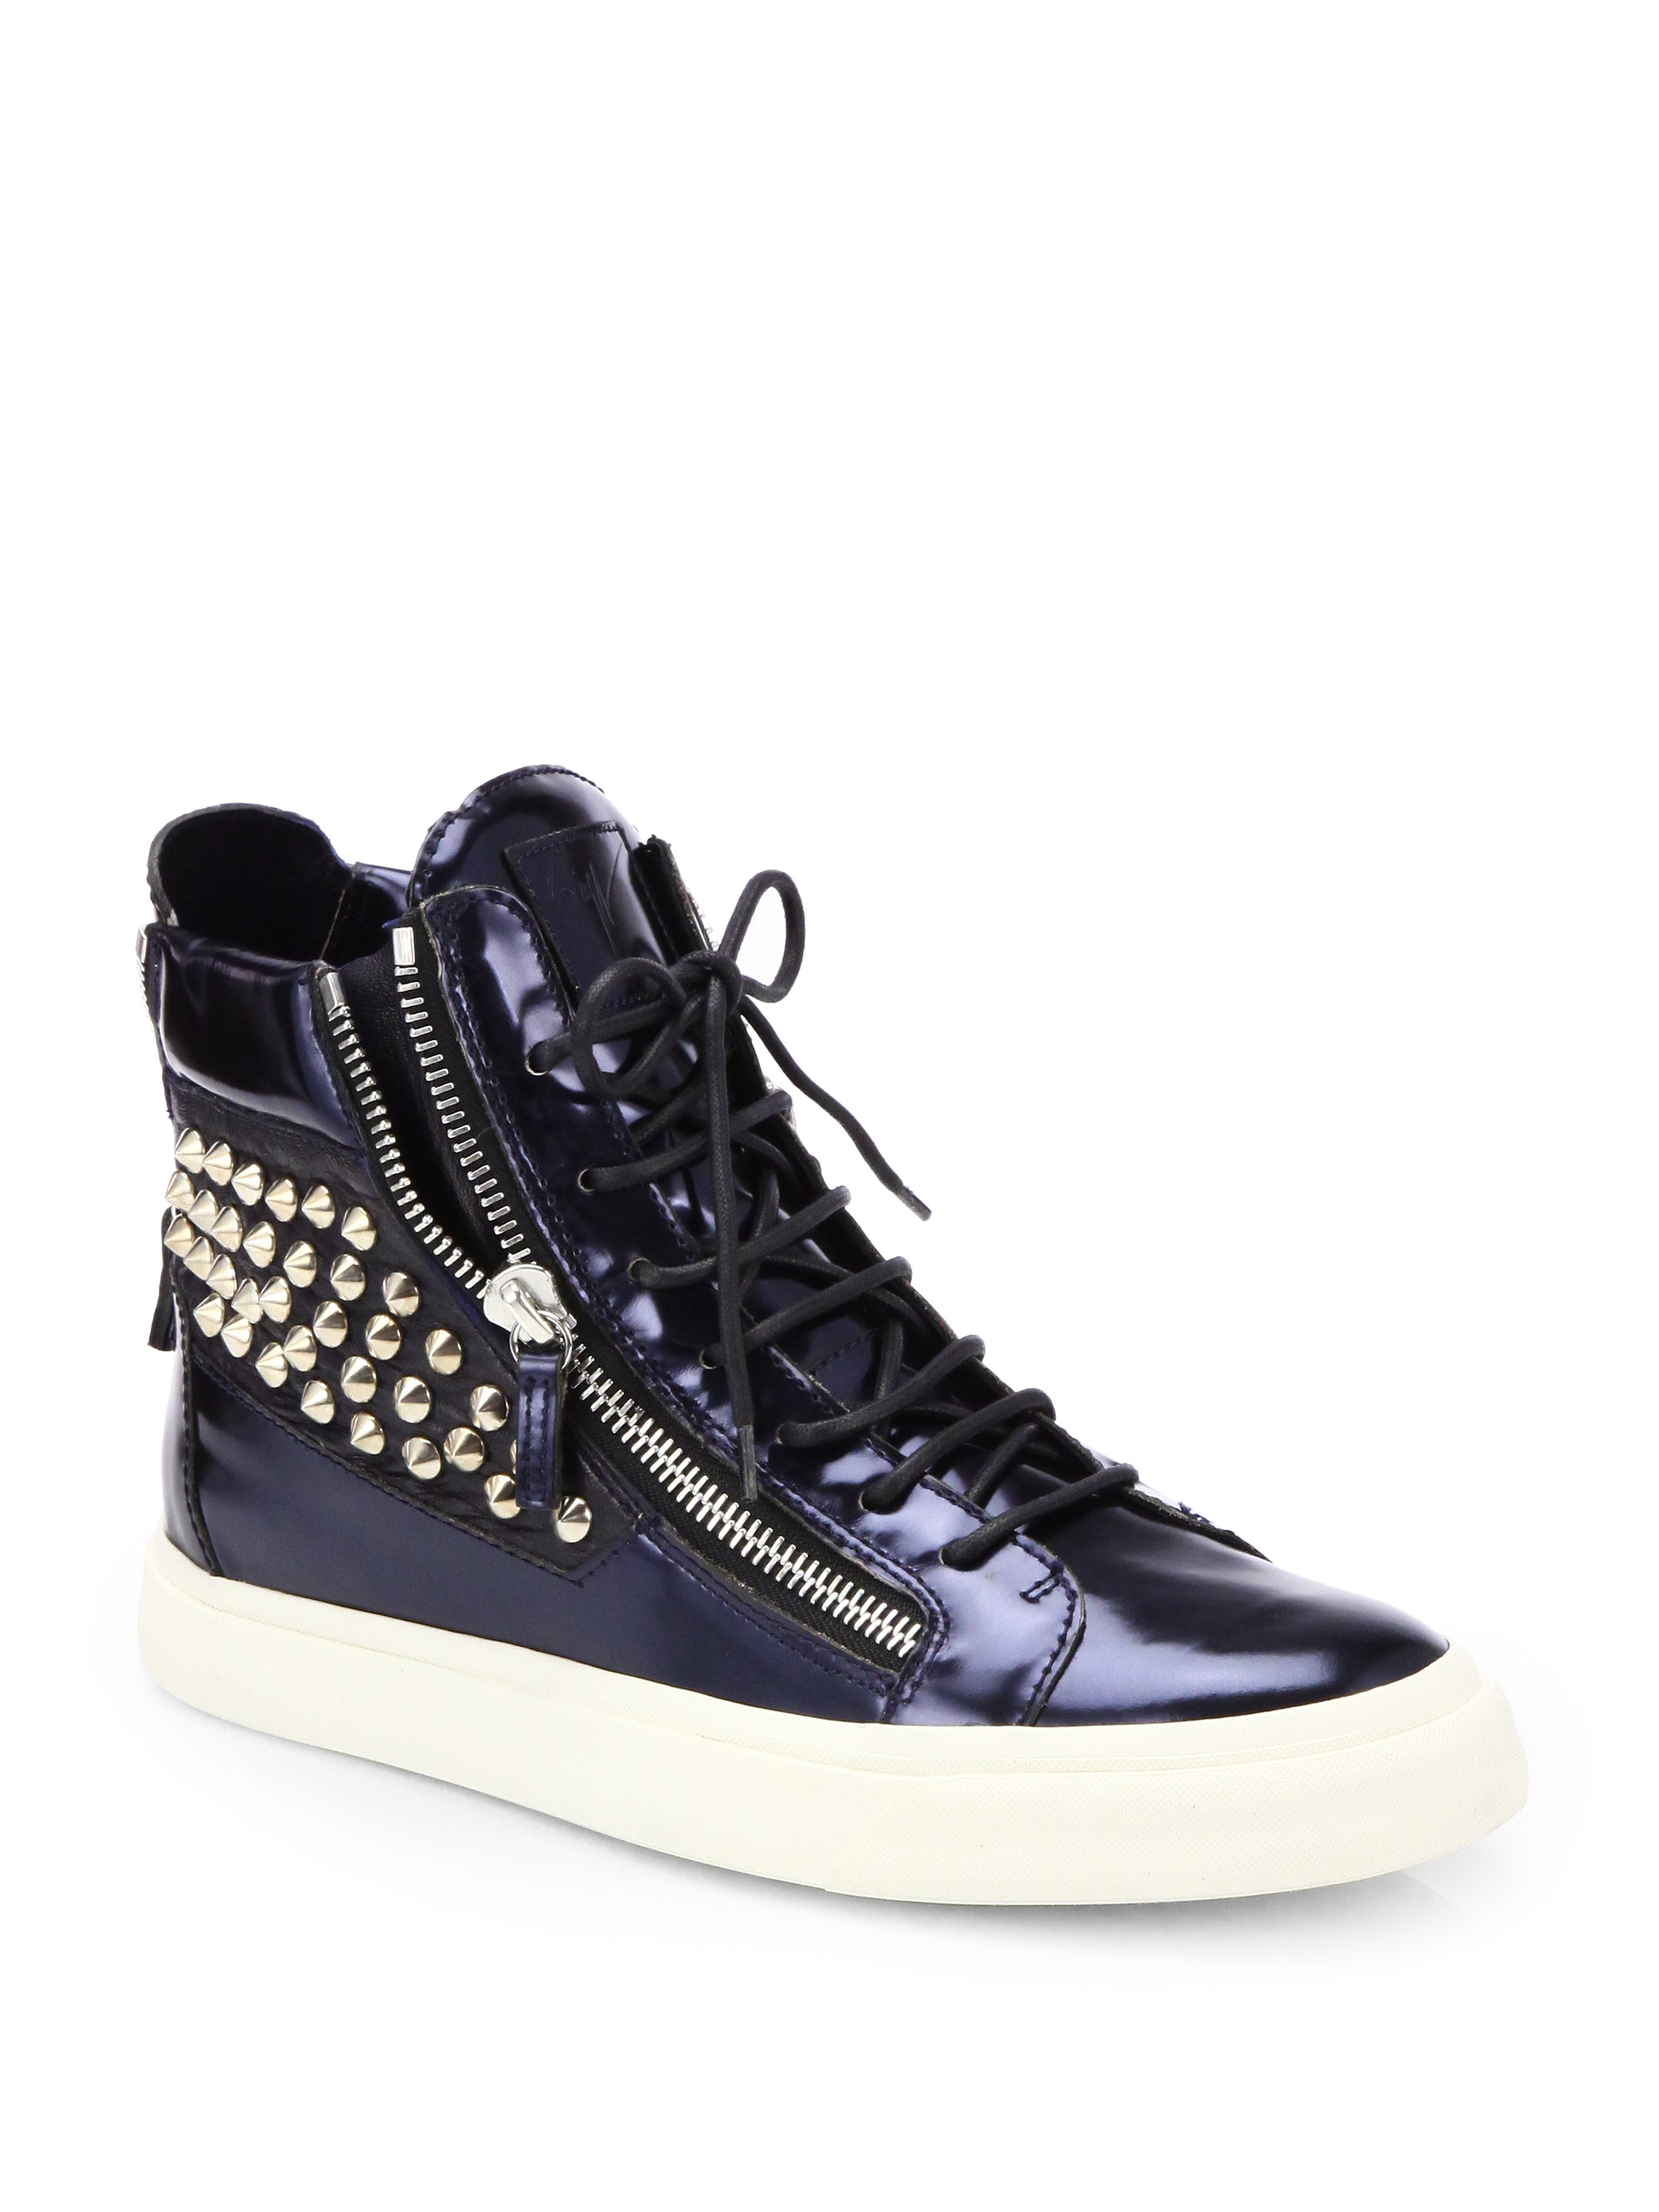 Giuseppe Zanotti Studded Doublezip Leather Hightop Sneakers in Blue for ...